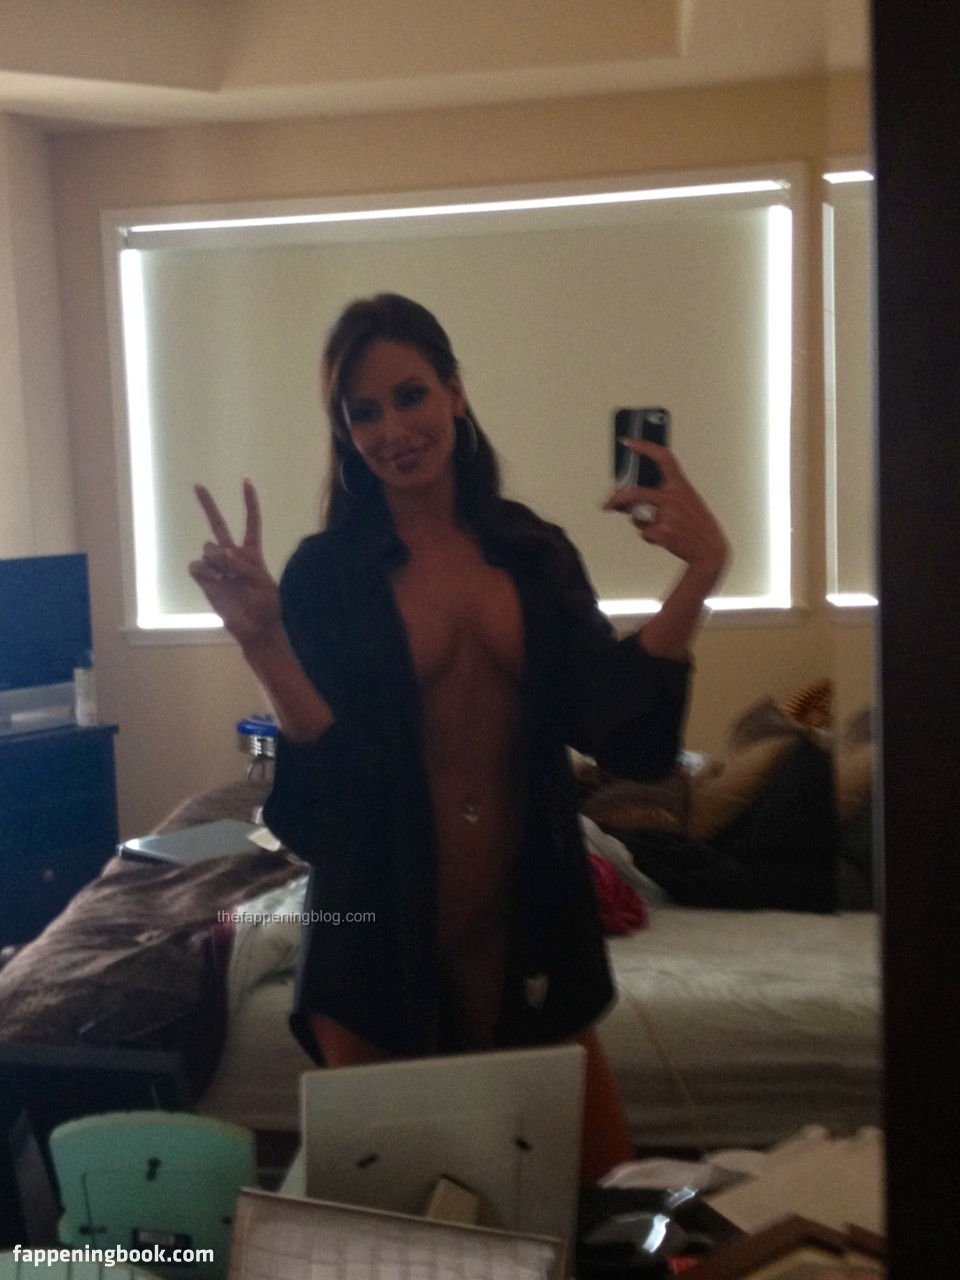 Holly Sonders Nude, The Fappening - Photo #651147 - FappeningBook.